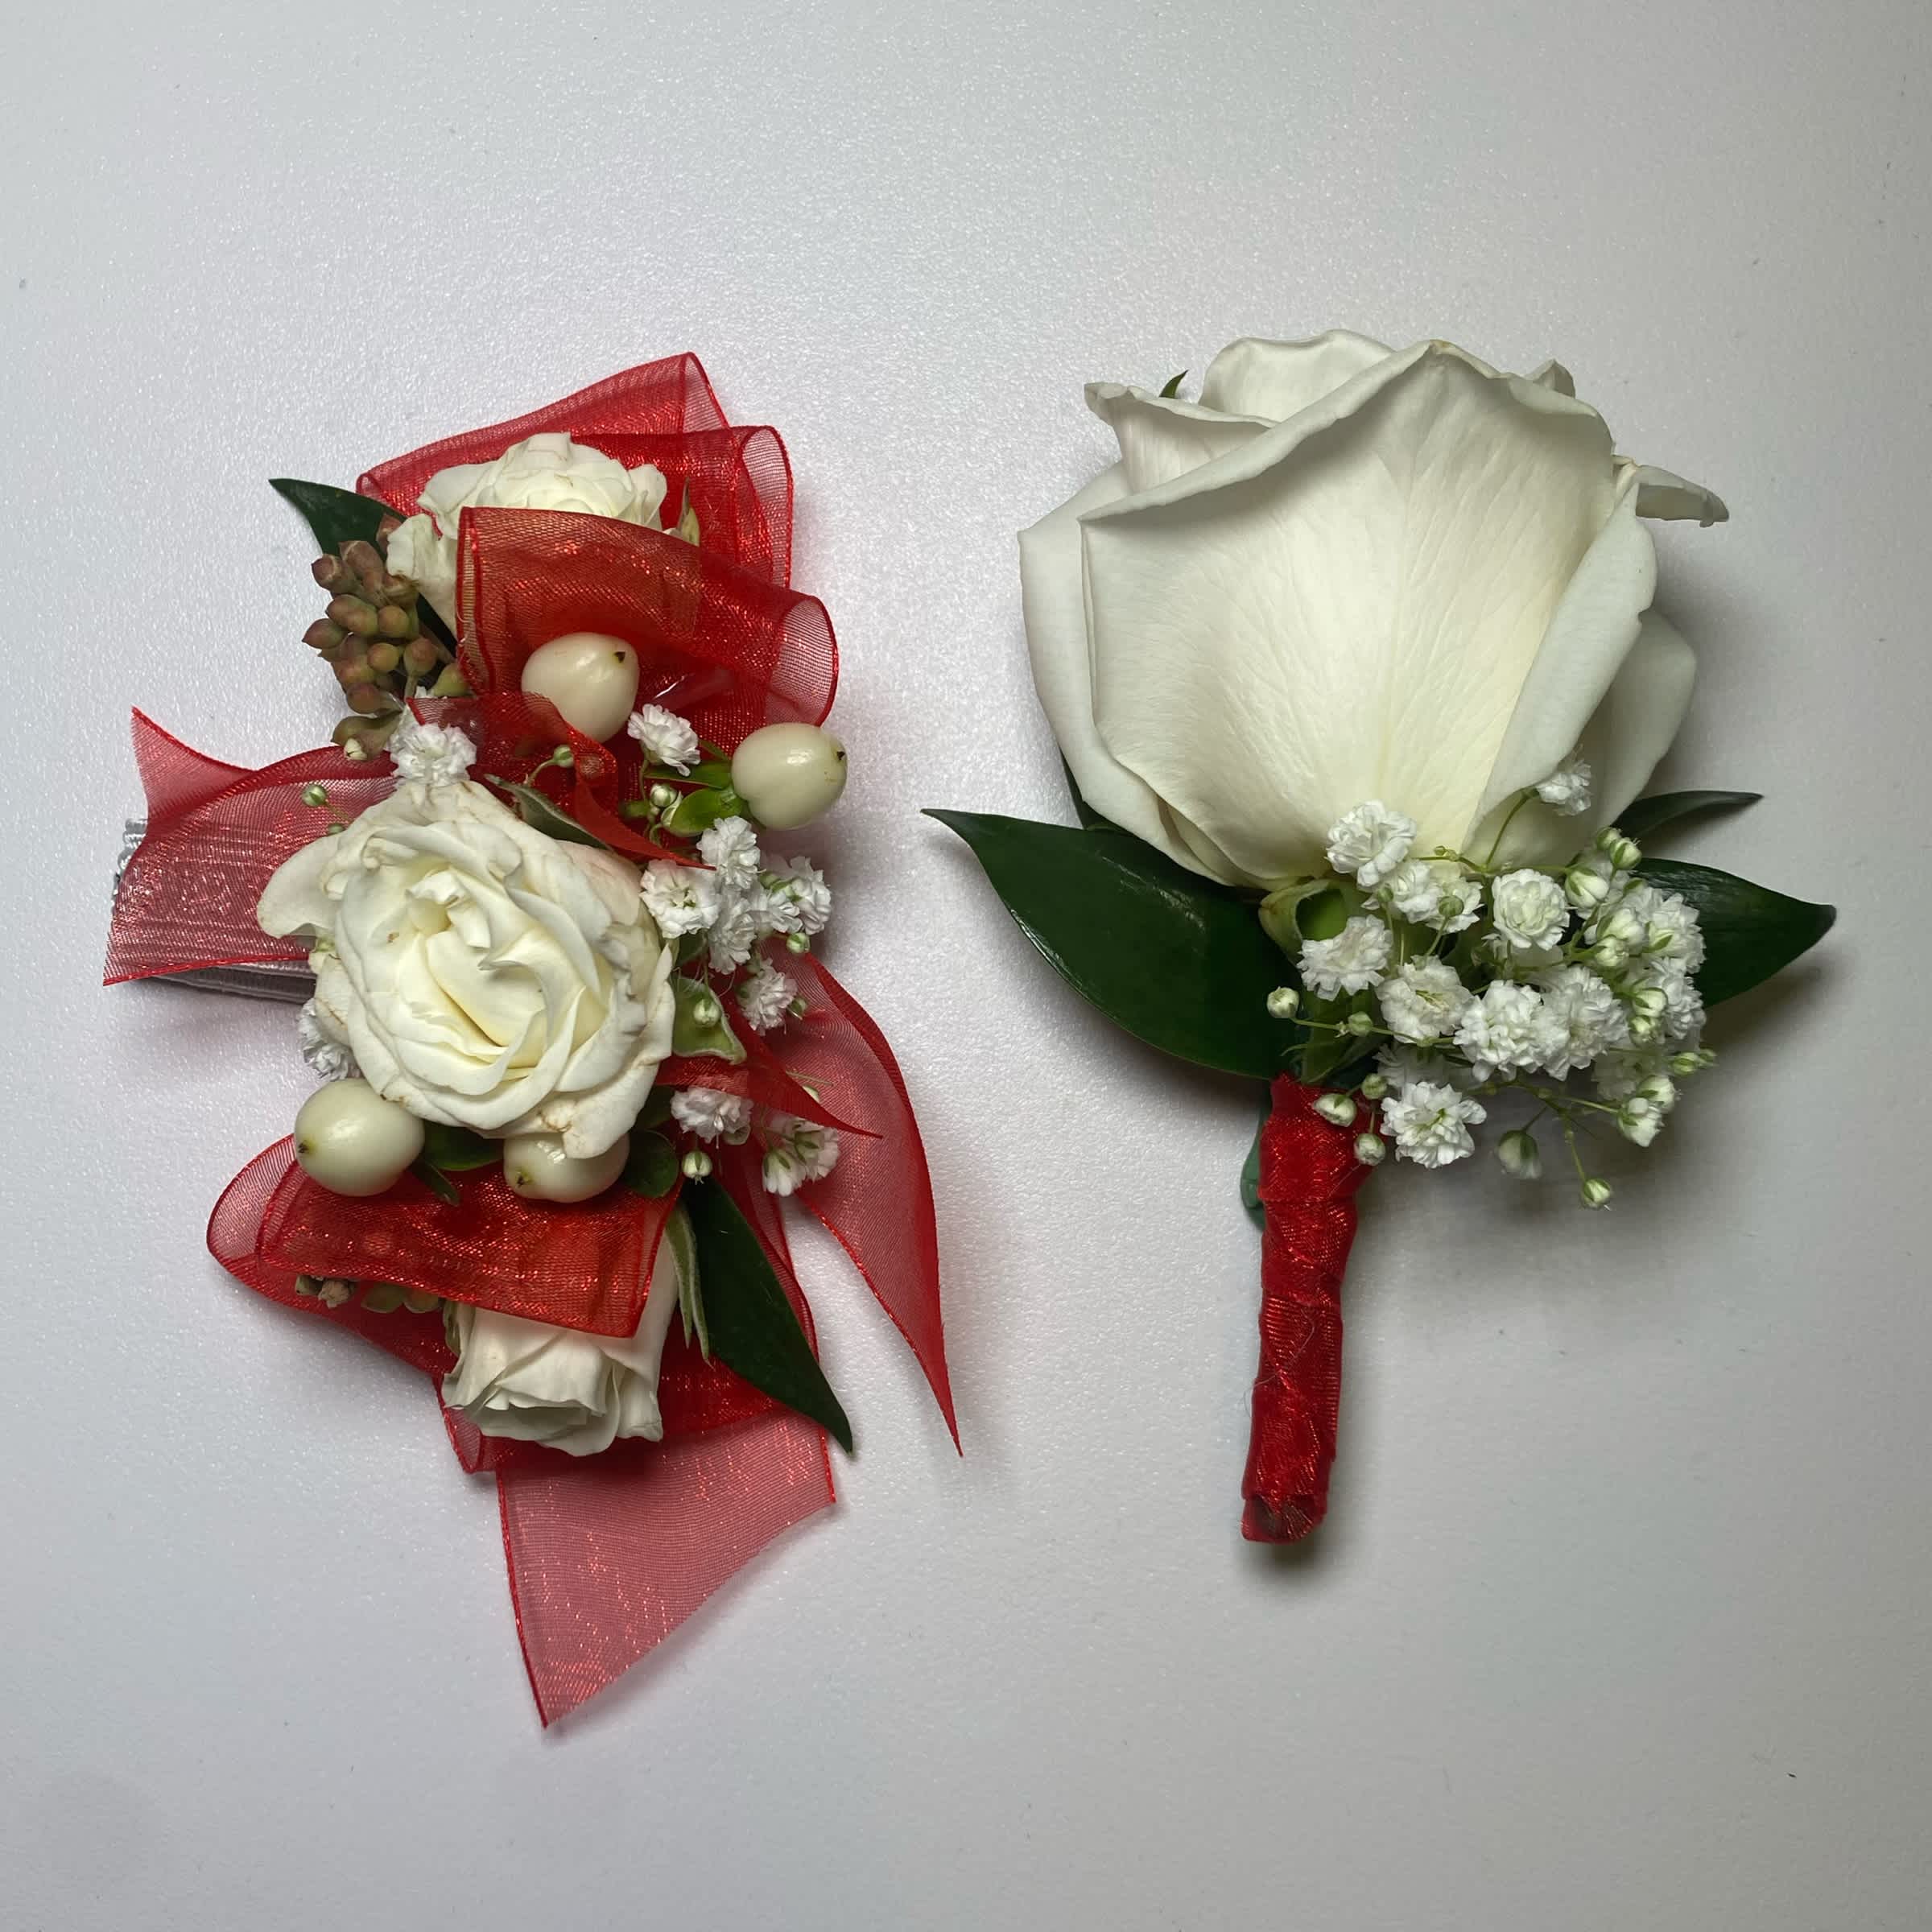 Red Set - Prom/ Wedding - This White Rose Corsage and Boutonniere Includes an Adult Size Elastic Wristband Corsage and Magnetic Boutonniere with Red Chiffon Ribbon. The Corsage Includes White Spray Roses, Hypericum Berries, Gentle Greenery and Seeded Eucalyptus. The Boutonniere includes a White Rose with Babies Breath and Gentle Greenery. Or as Similar as Possible.